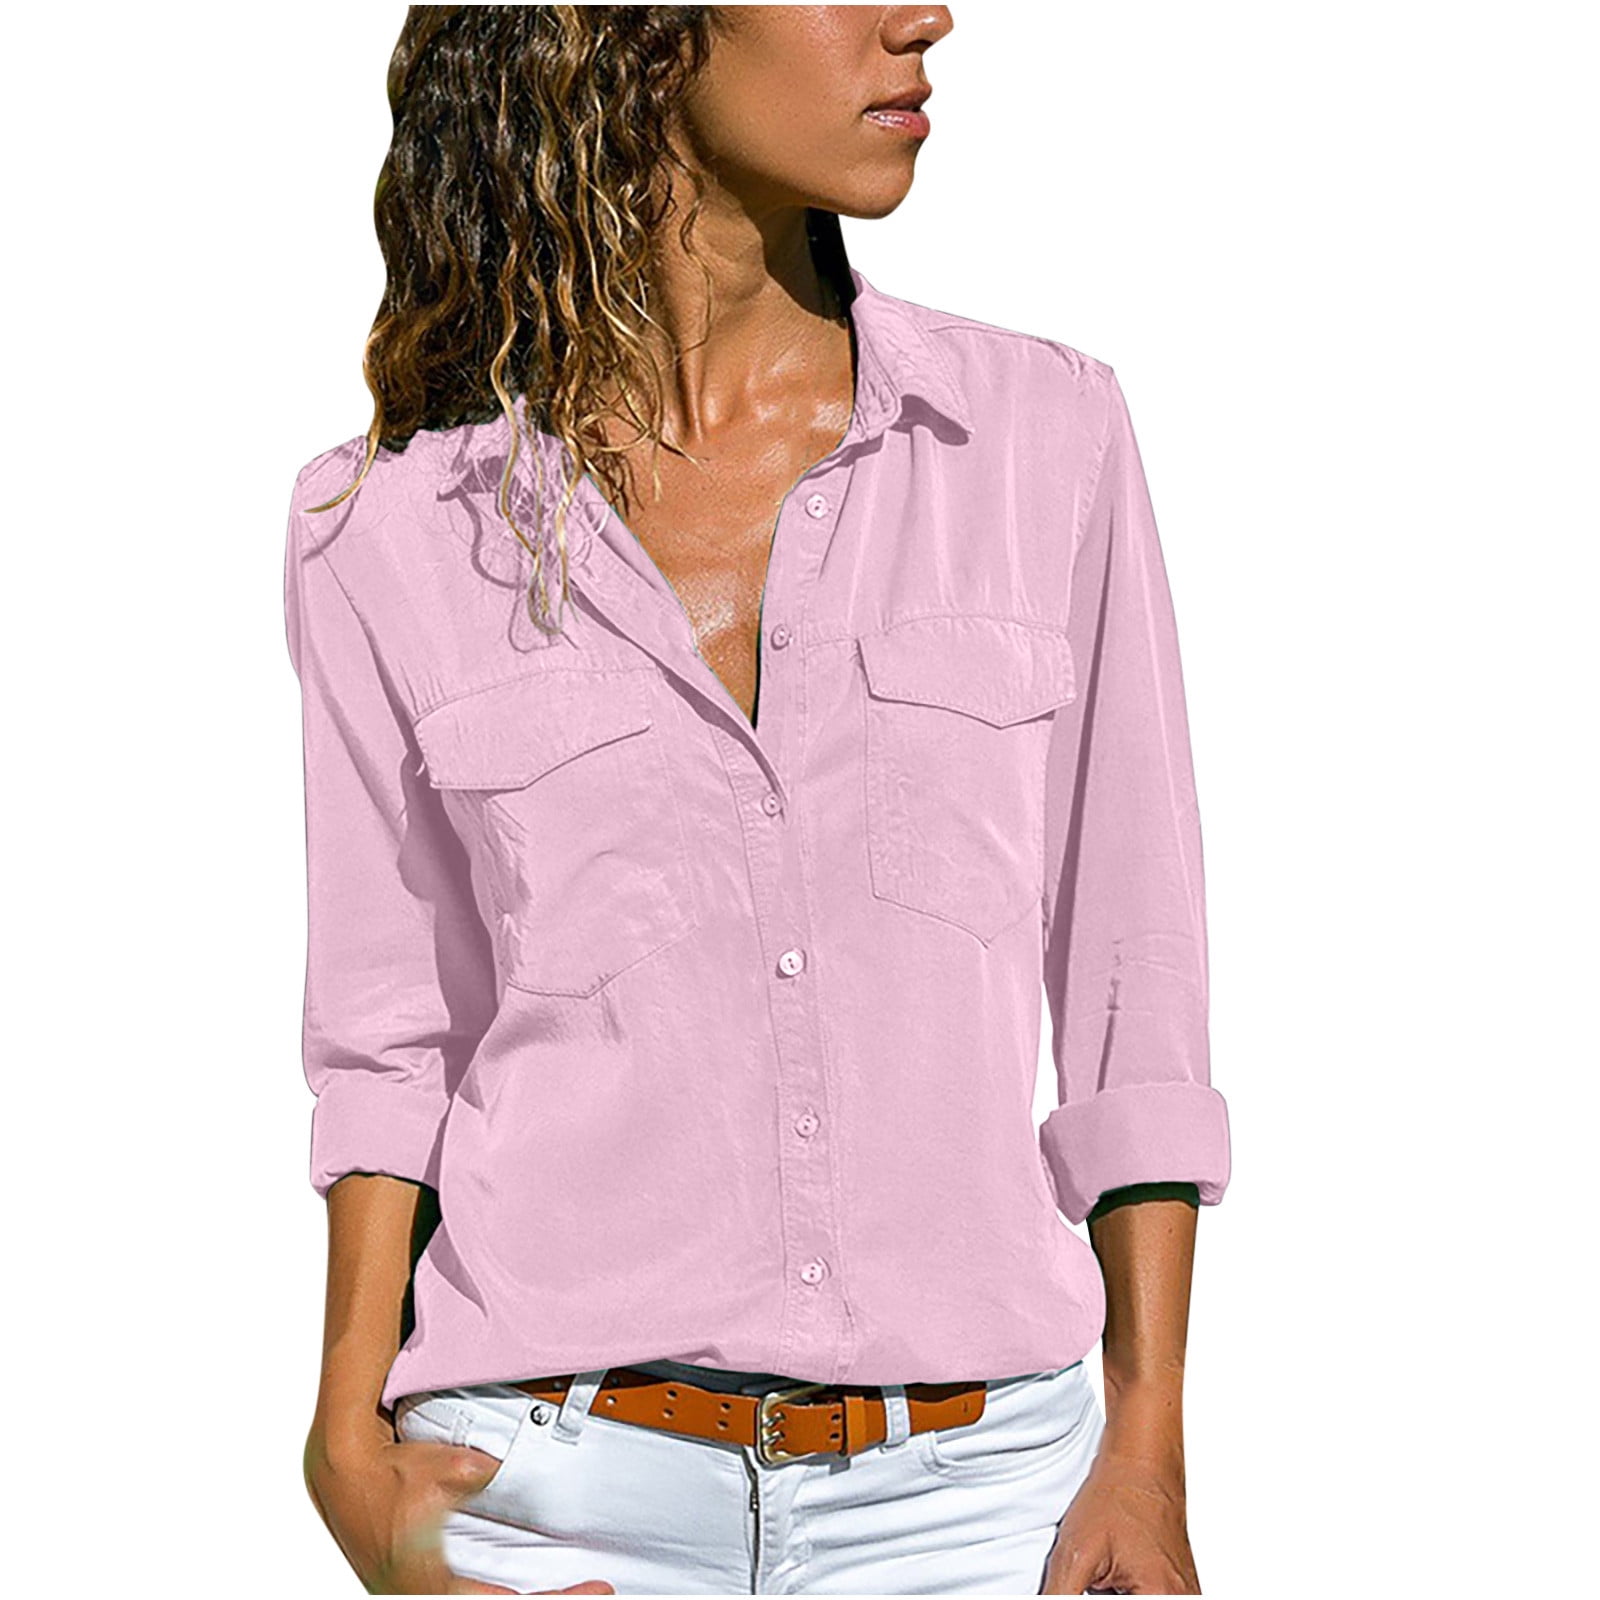 JWZUY Womens Cotton Button Down Shirts Long V Neck Loose Business Casual Solid Work Office Tops with Pocket Pink XXXXL - Walmart.com